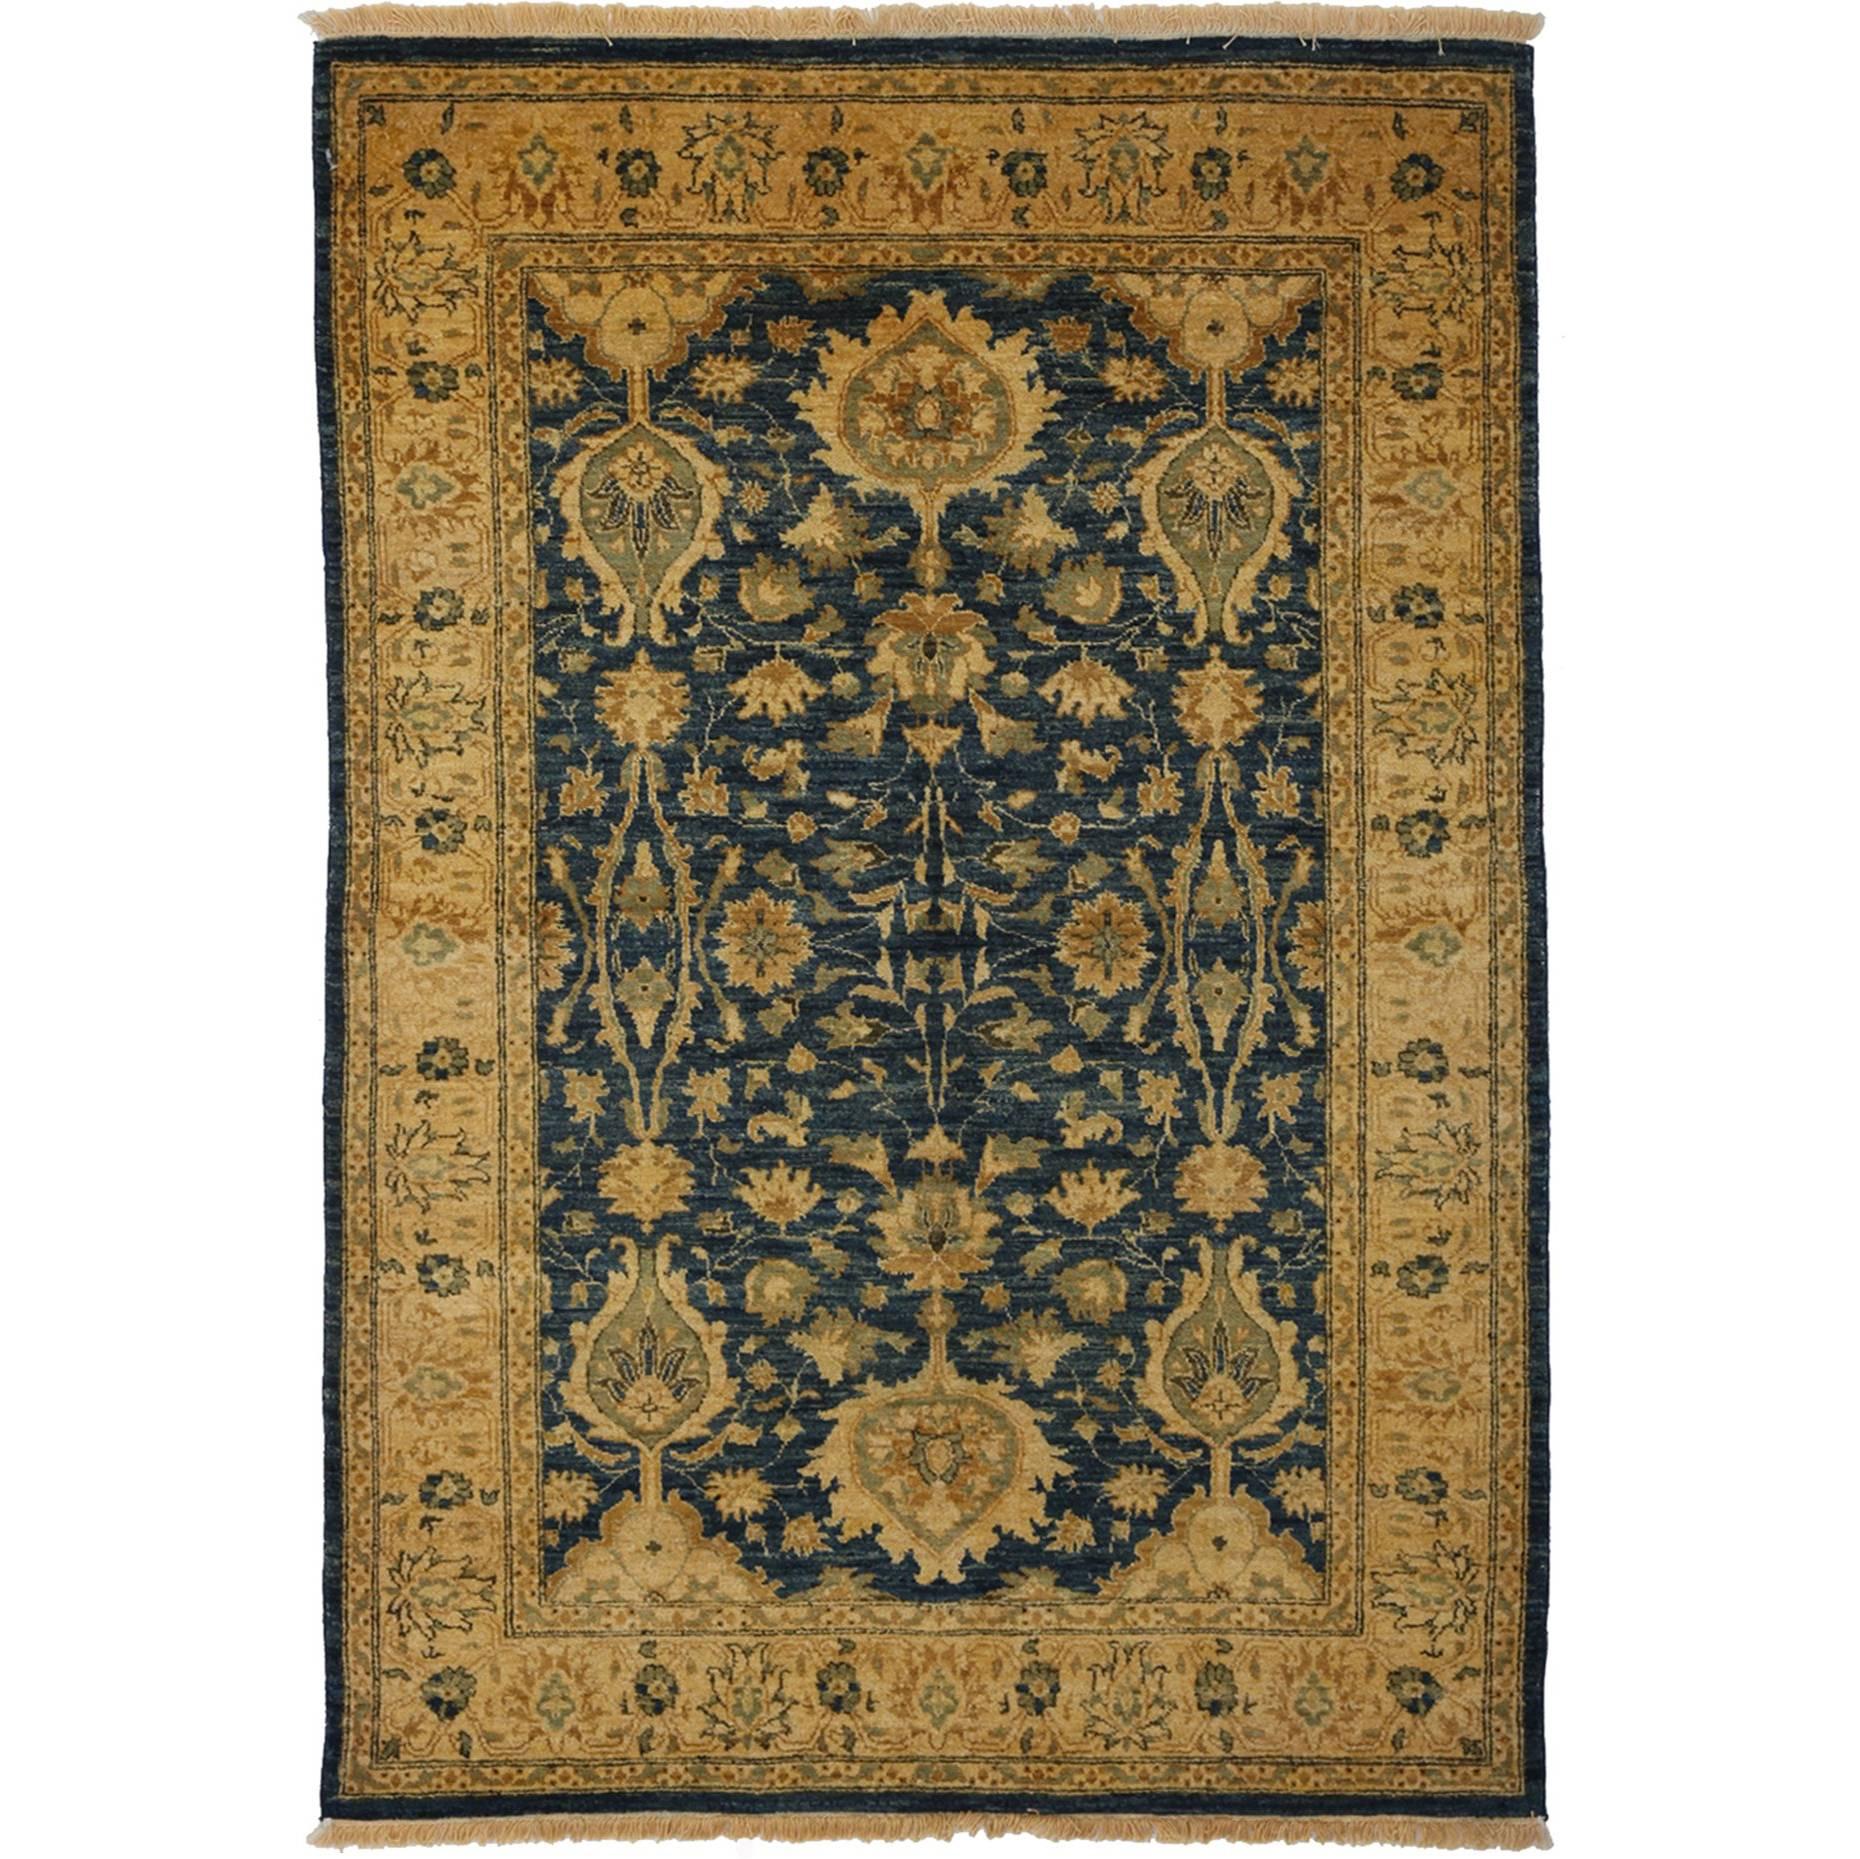 One-of-a-Kind Oriental Silky Oushak Wool Hand-Knotted Area Rug, Azure, 5'2 x 7'5